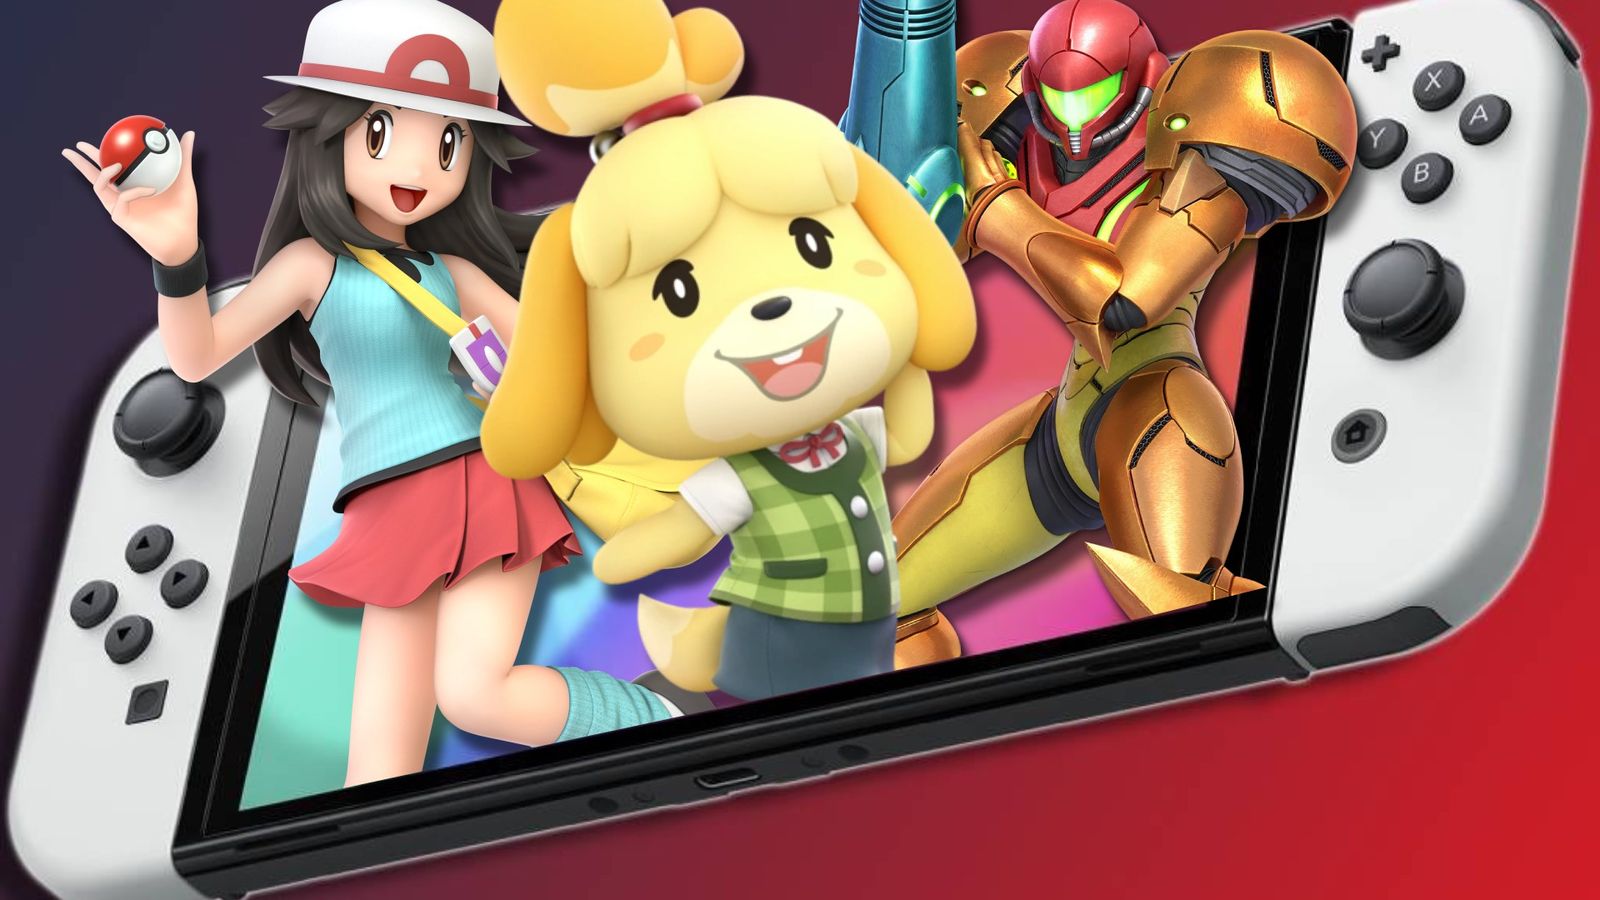 Pokémon Trainer, Isabelle, and Samus Aran jumping out of the Nintendo switch 